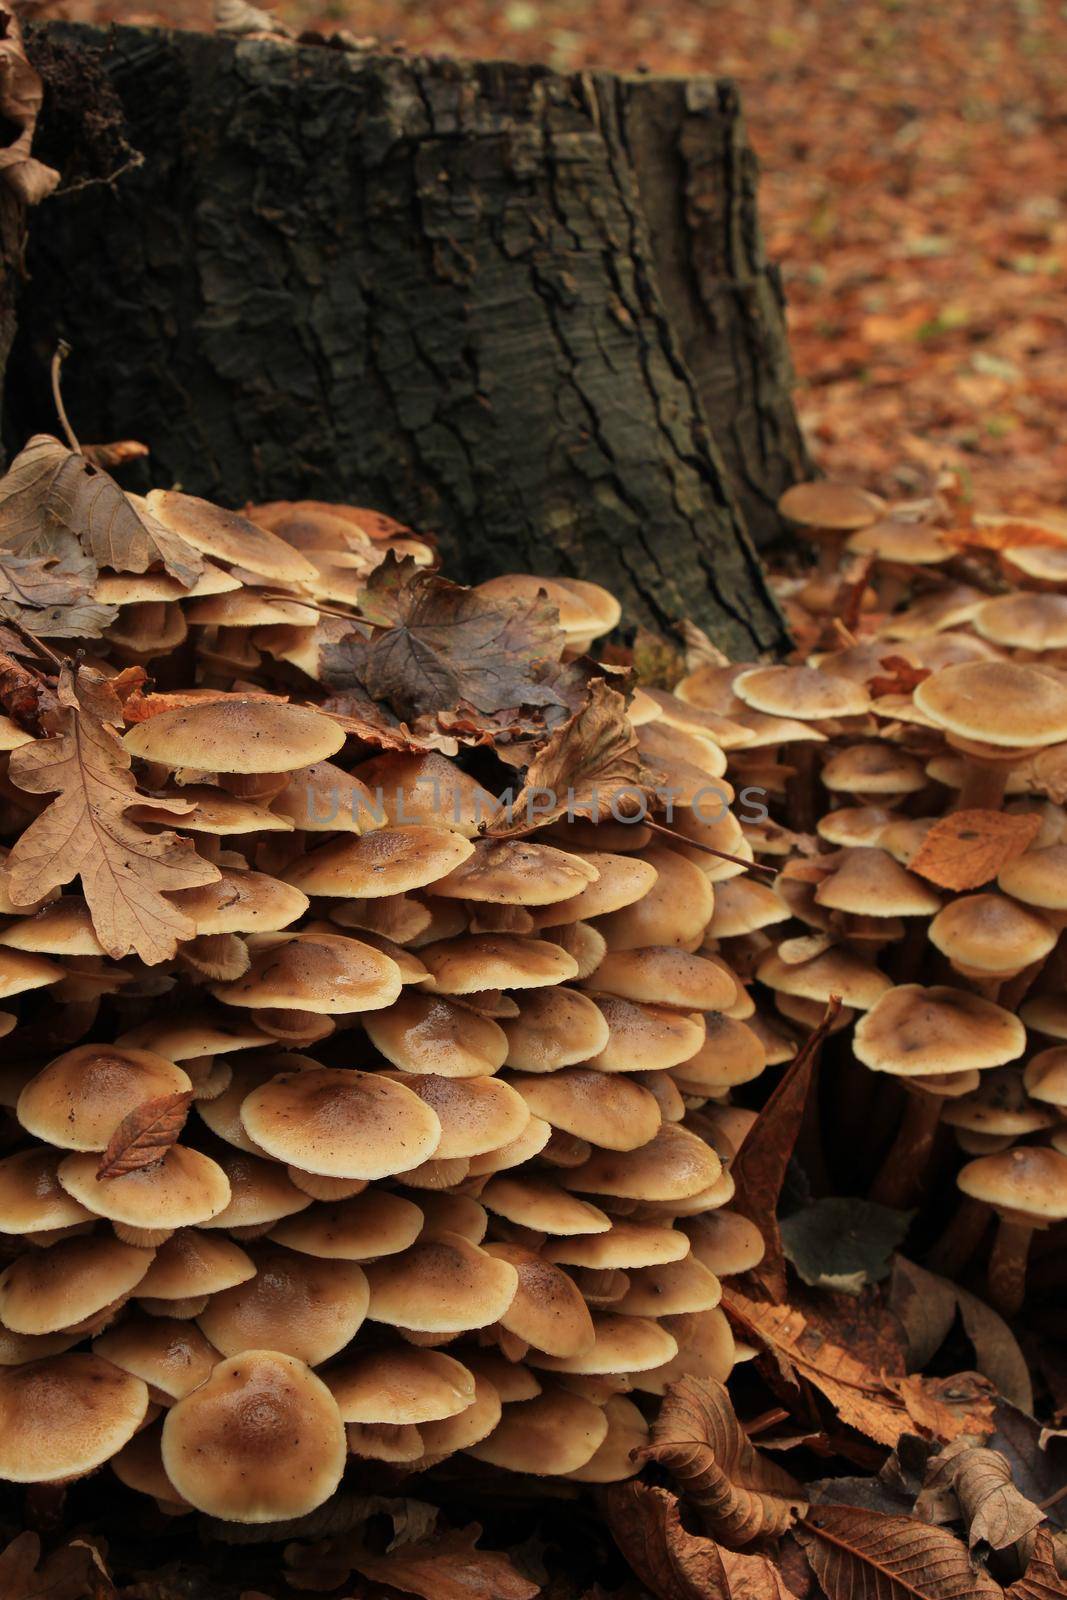 Group of mushrooms in a fall forest by studioportosabbia